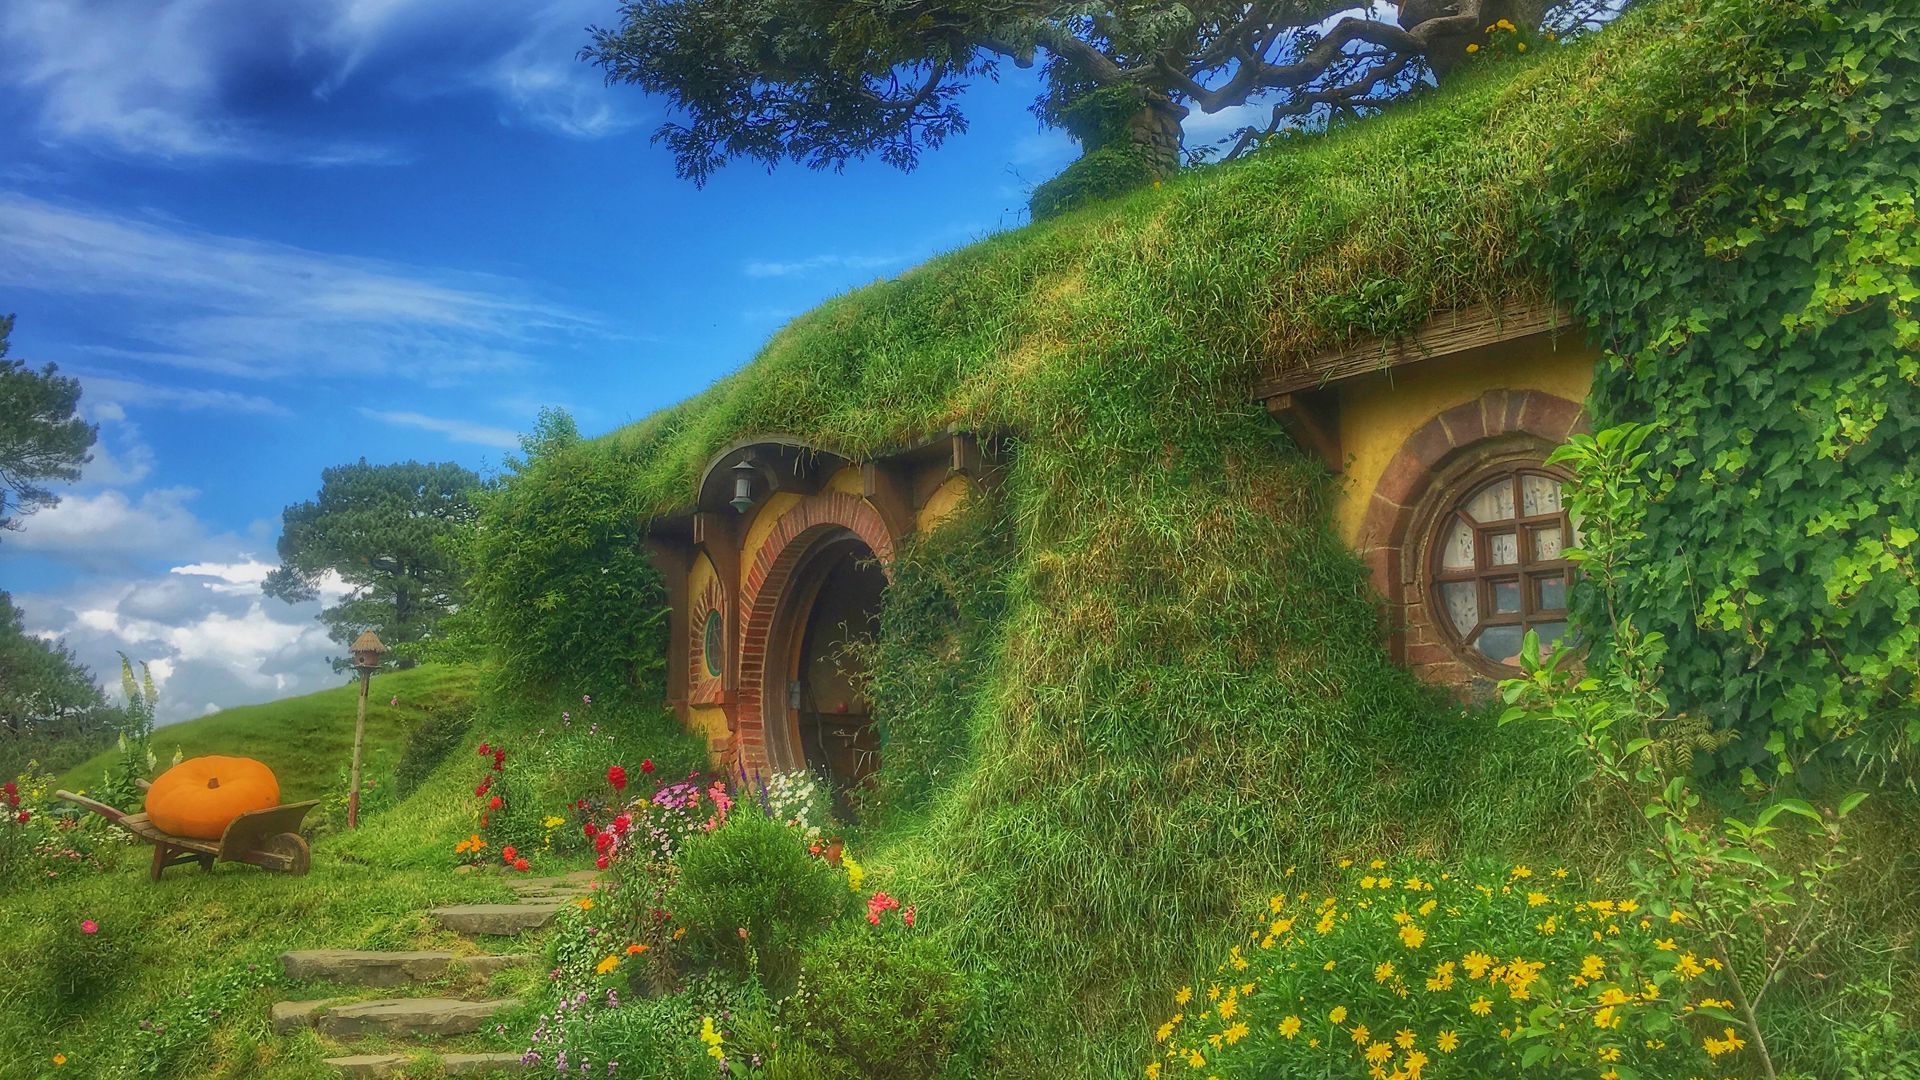 Download wallpaper x hobbiton movie set forest house fabulous new zealand full hd hdtv fhd p hd background